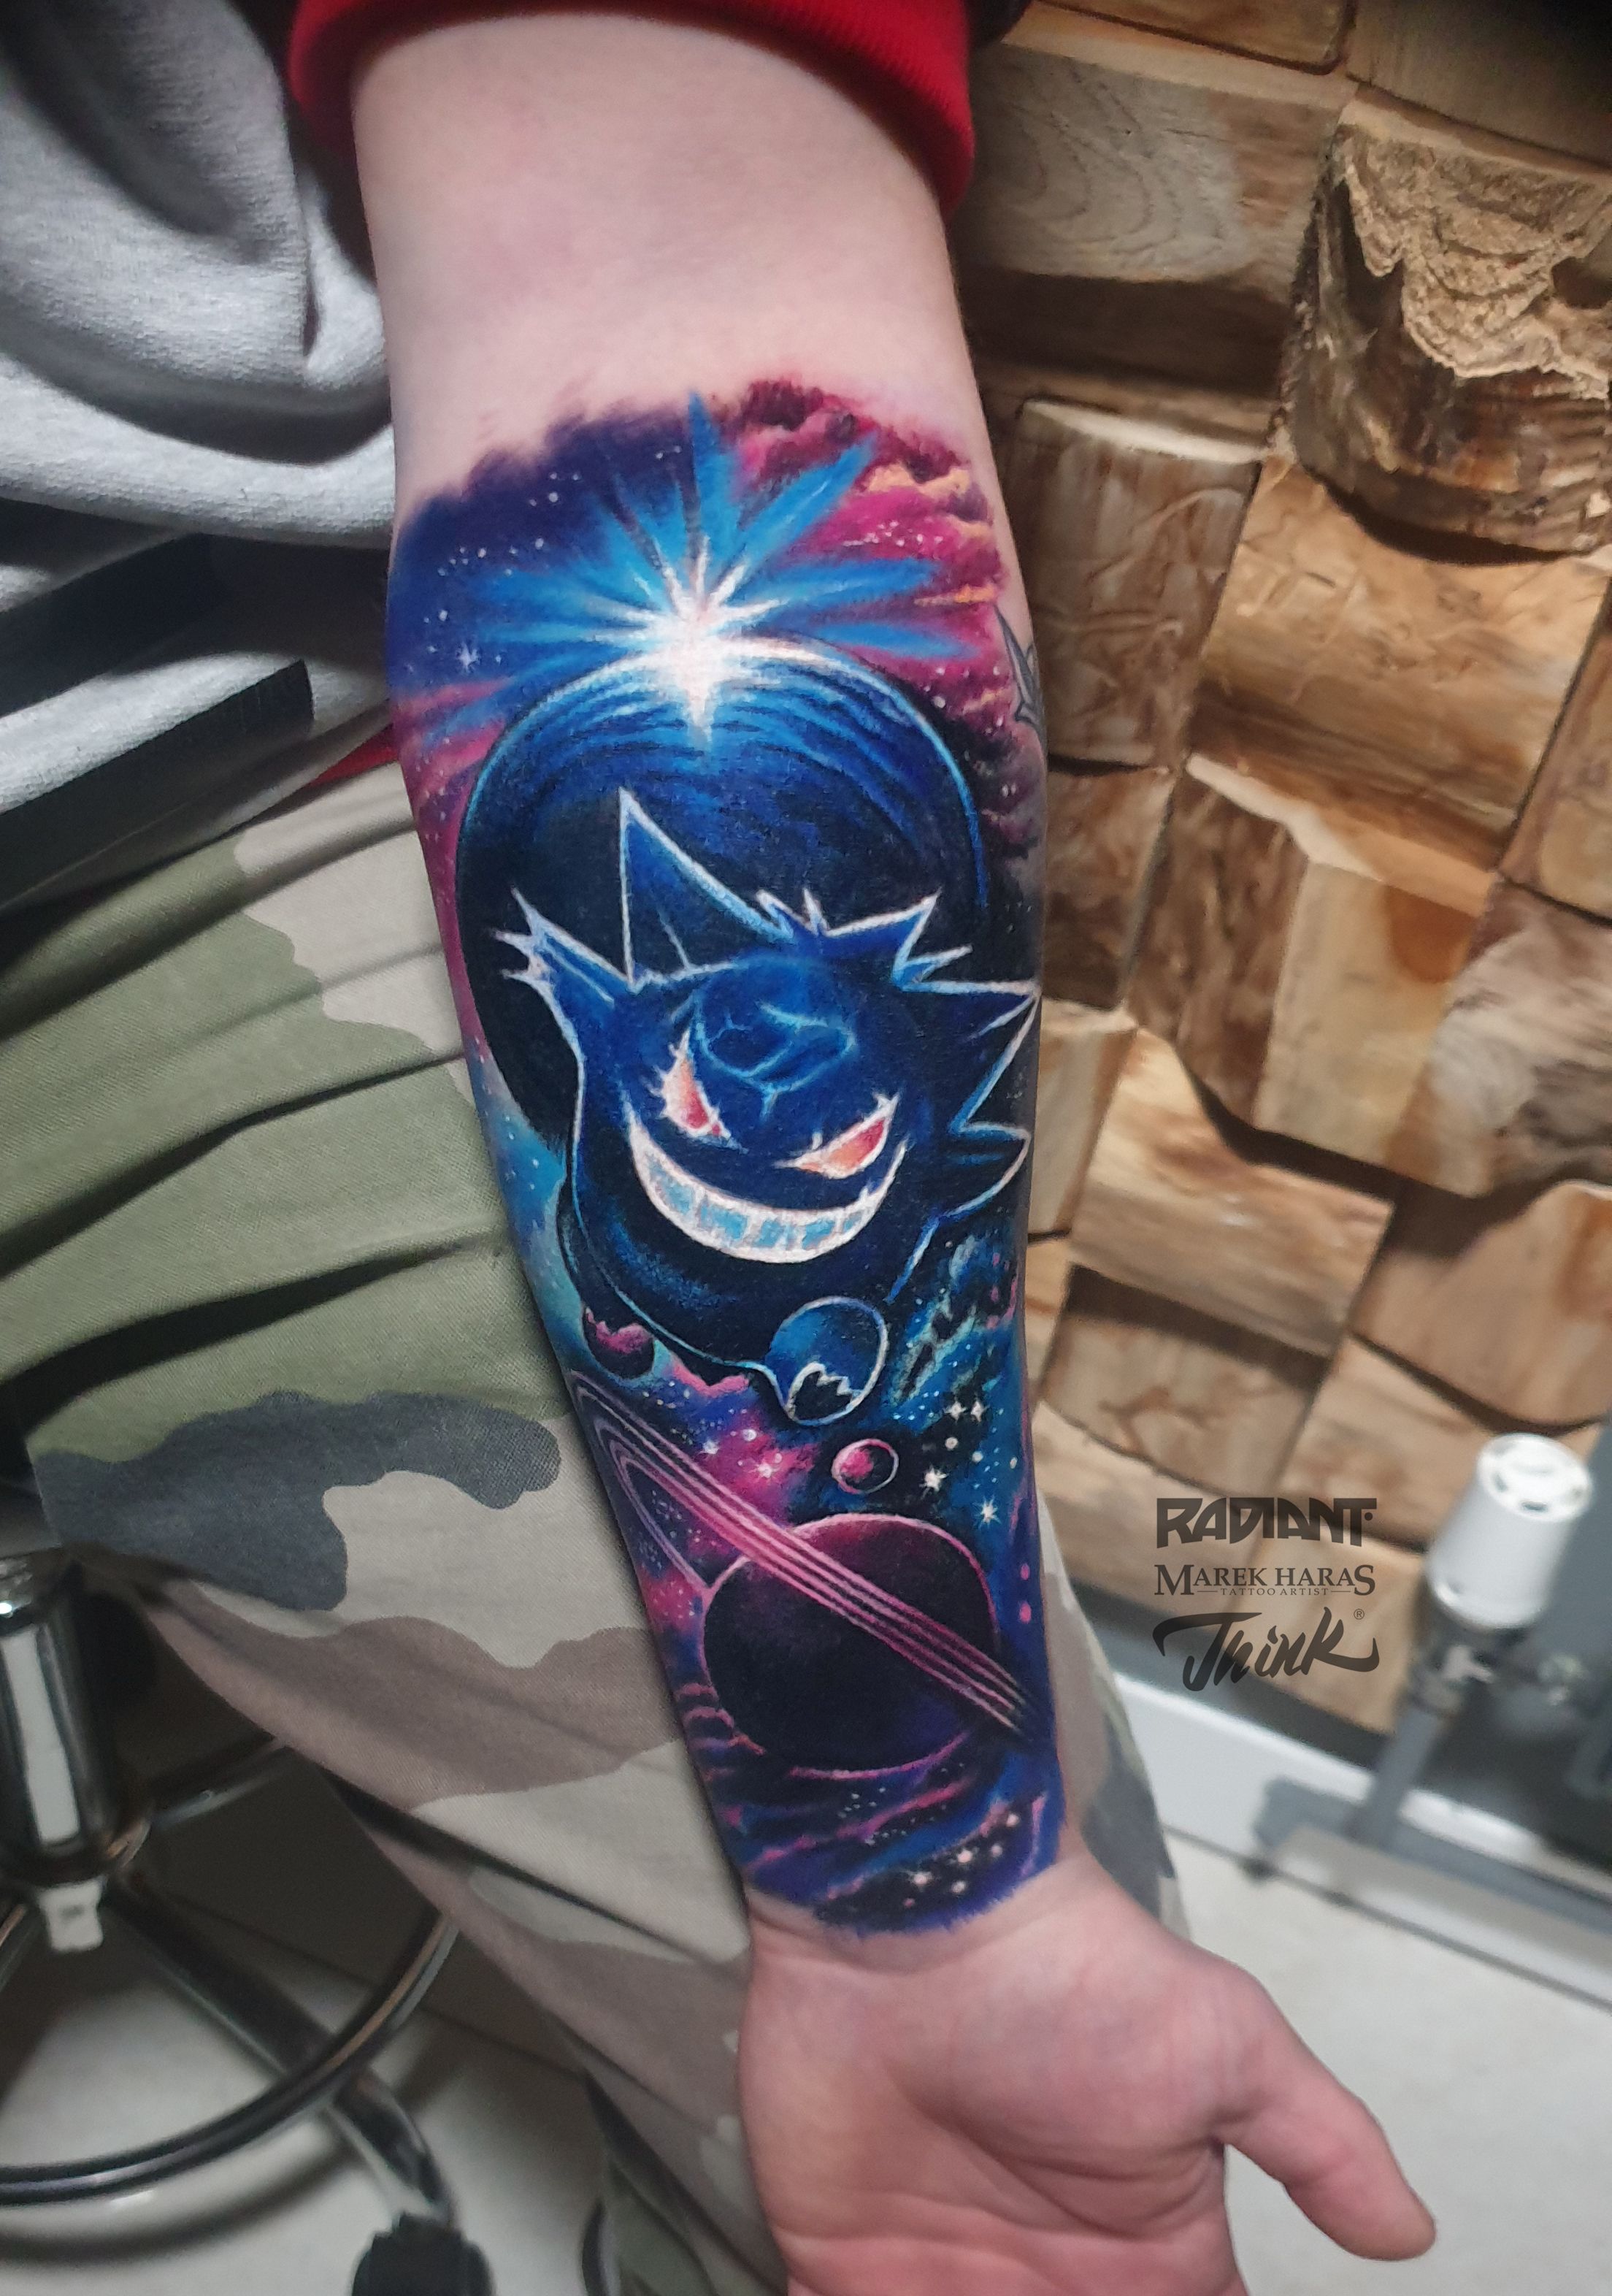 Can someone please recreate Will pay for good result same style shading  pikachu gengar gastly or haunter would be great too  rDrawMyTattoo